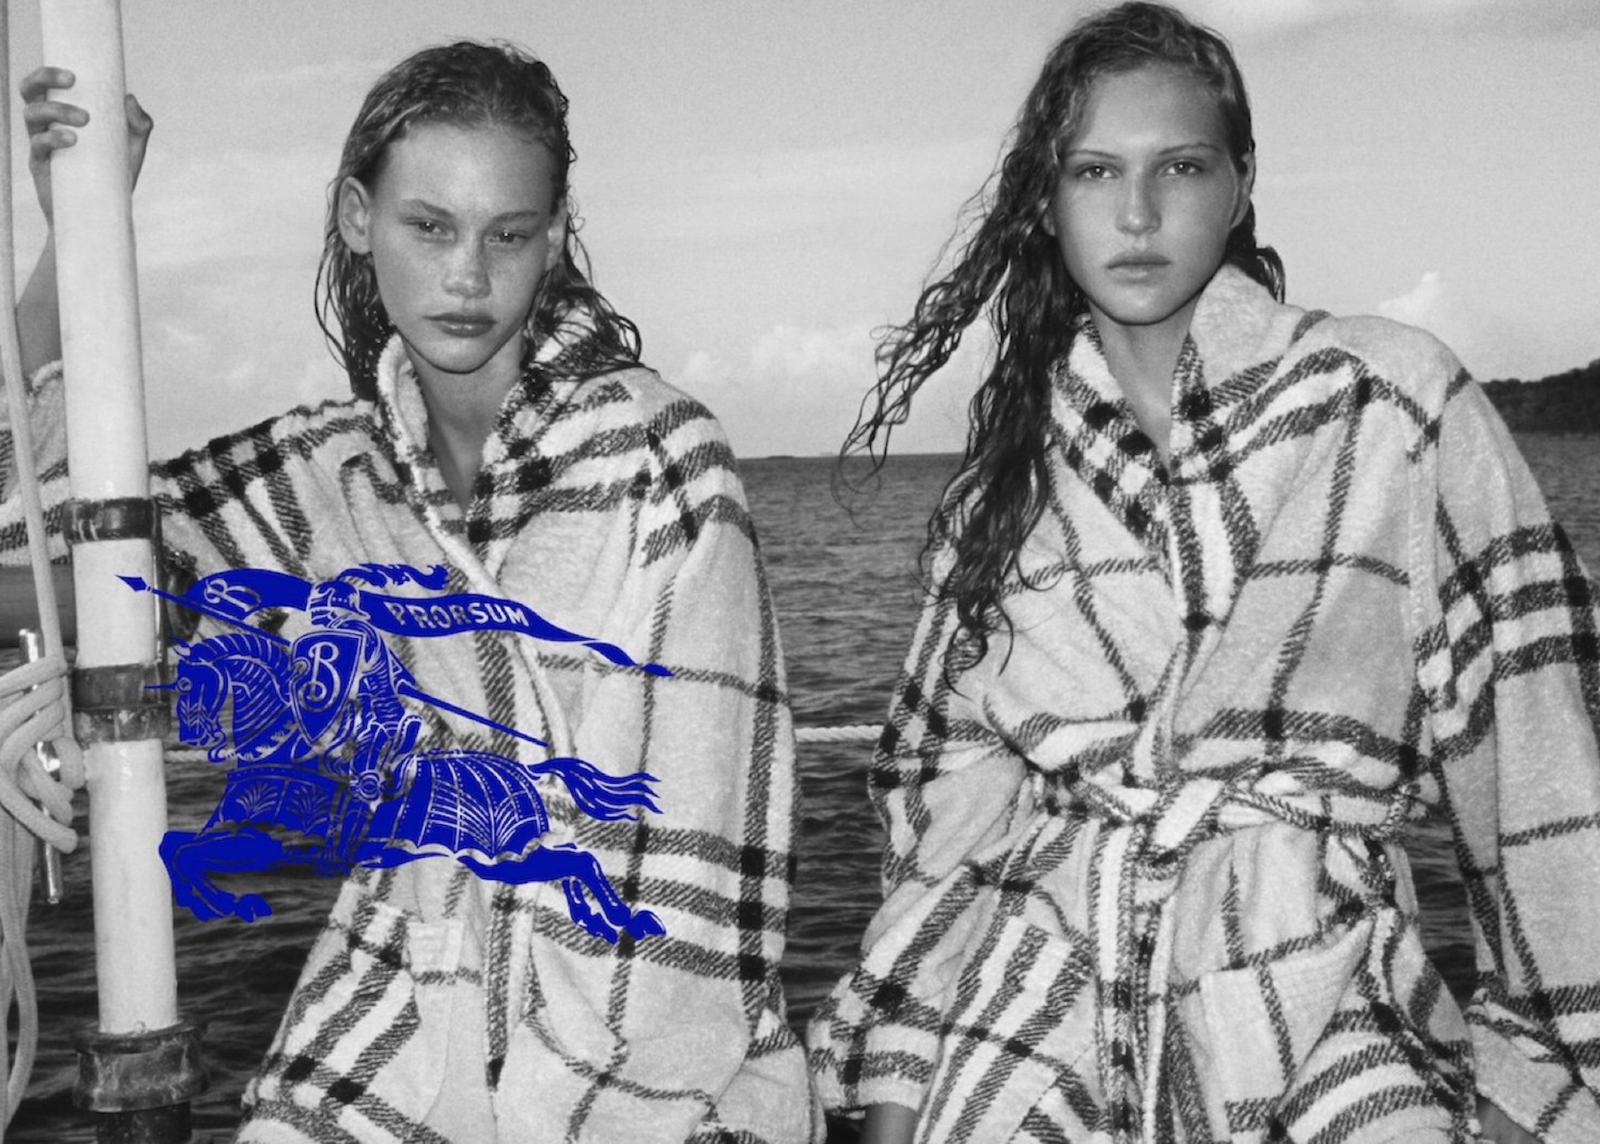 Burberry Undergoing a “Quiet Revolution,” as it Aims for £5B Brand